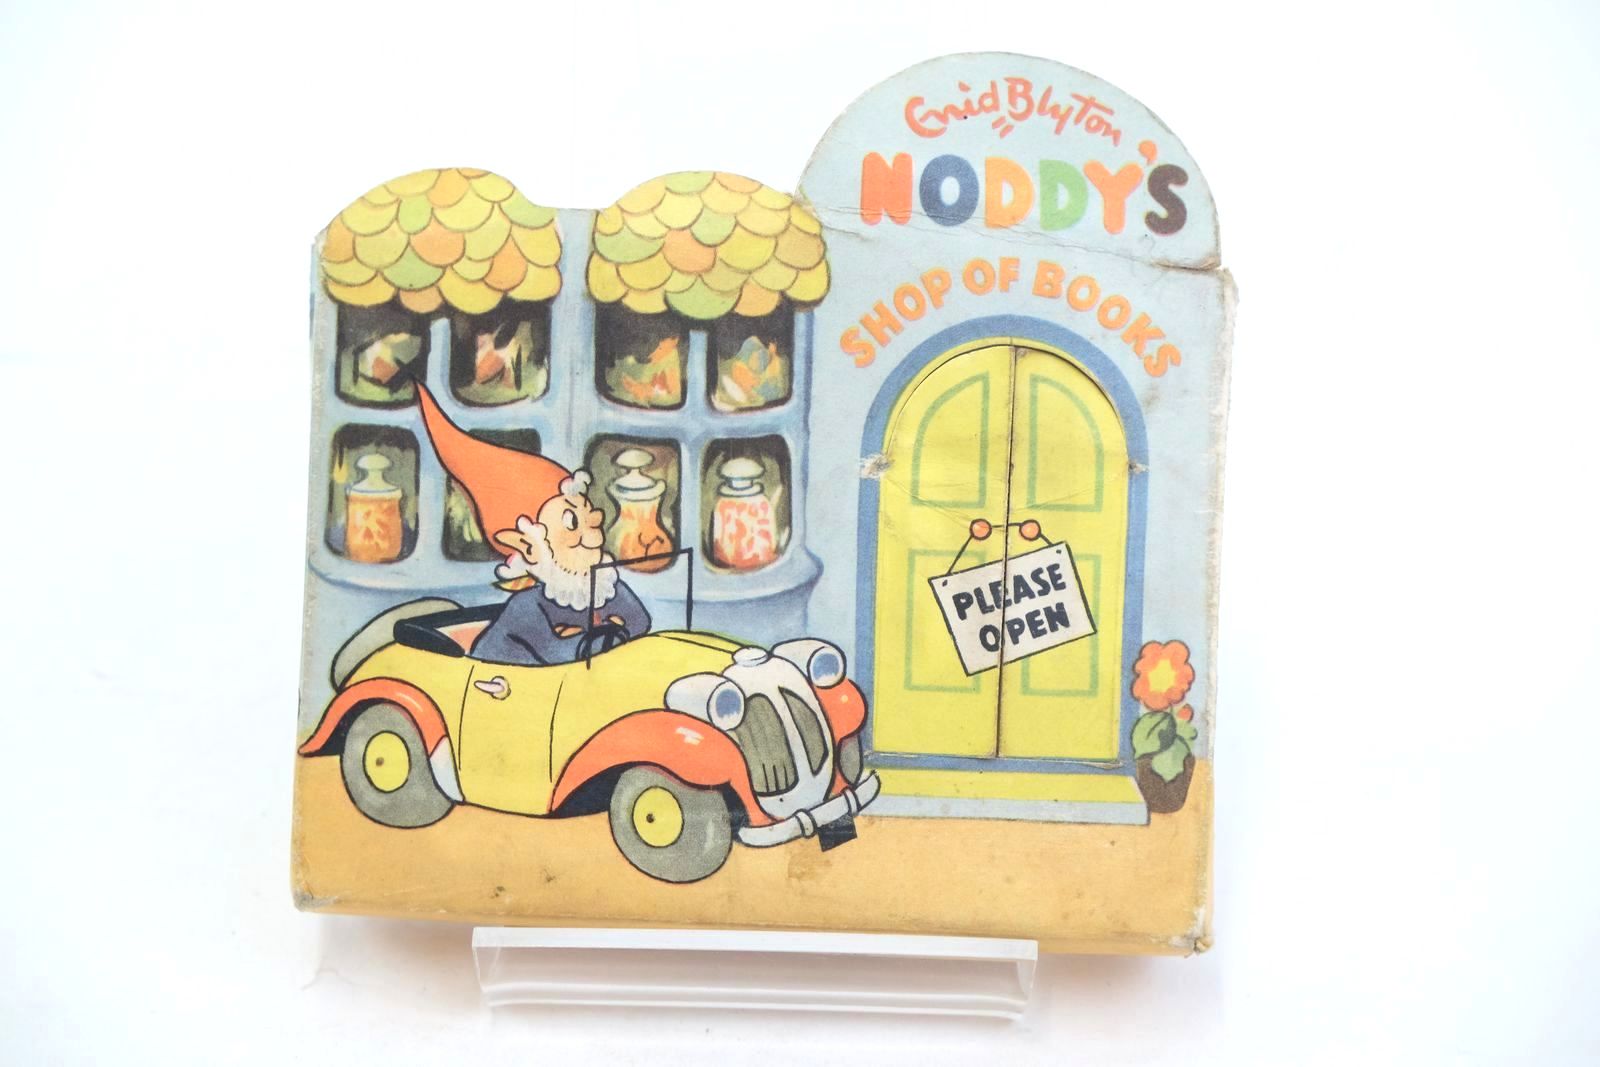 Photo of NODDY'S SHOP OF BOOKS written by Blyton, Enid published by Sampson Low, Marston &amp; Co. Ltd. (STOCK CODE: 1320090)  for sale by Stella & Rose's Books